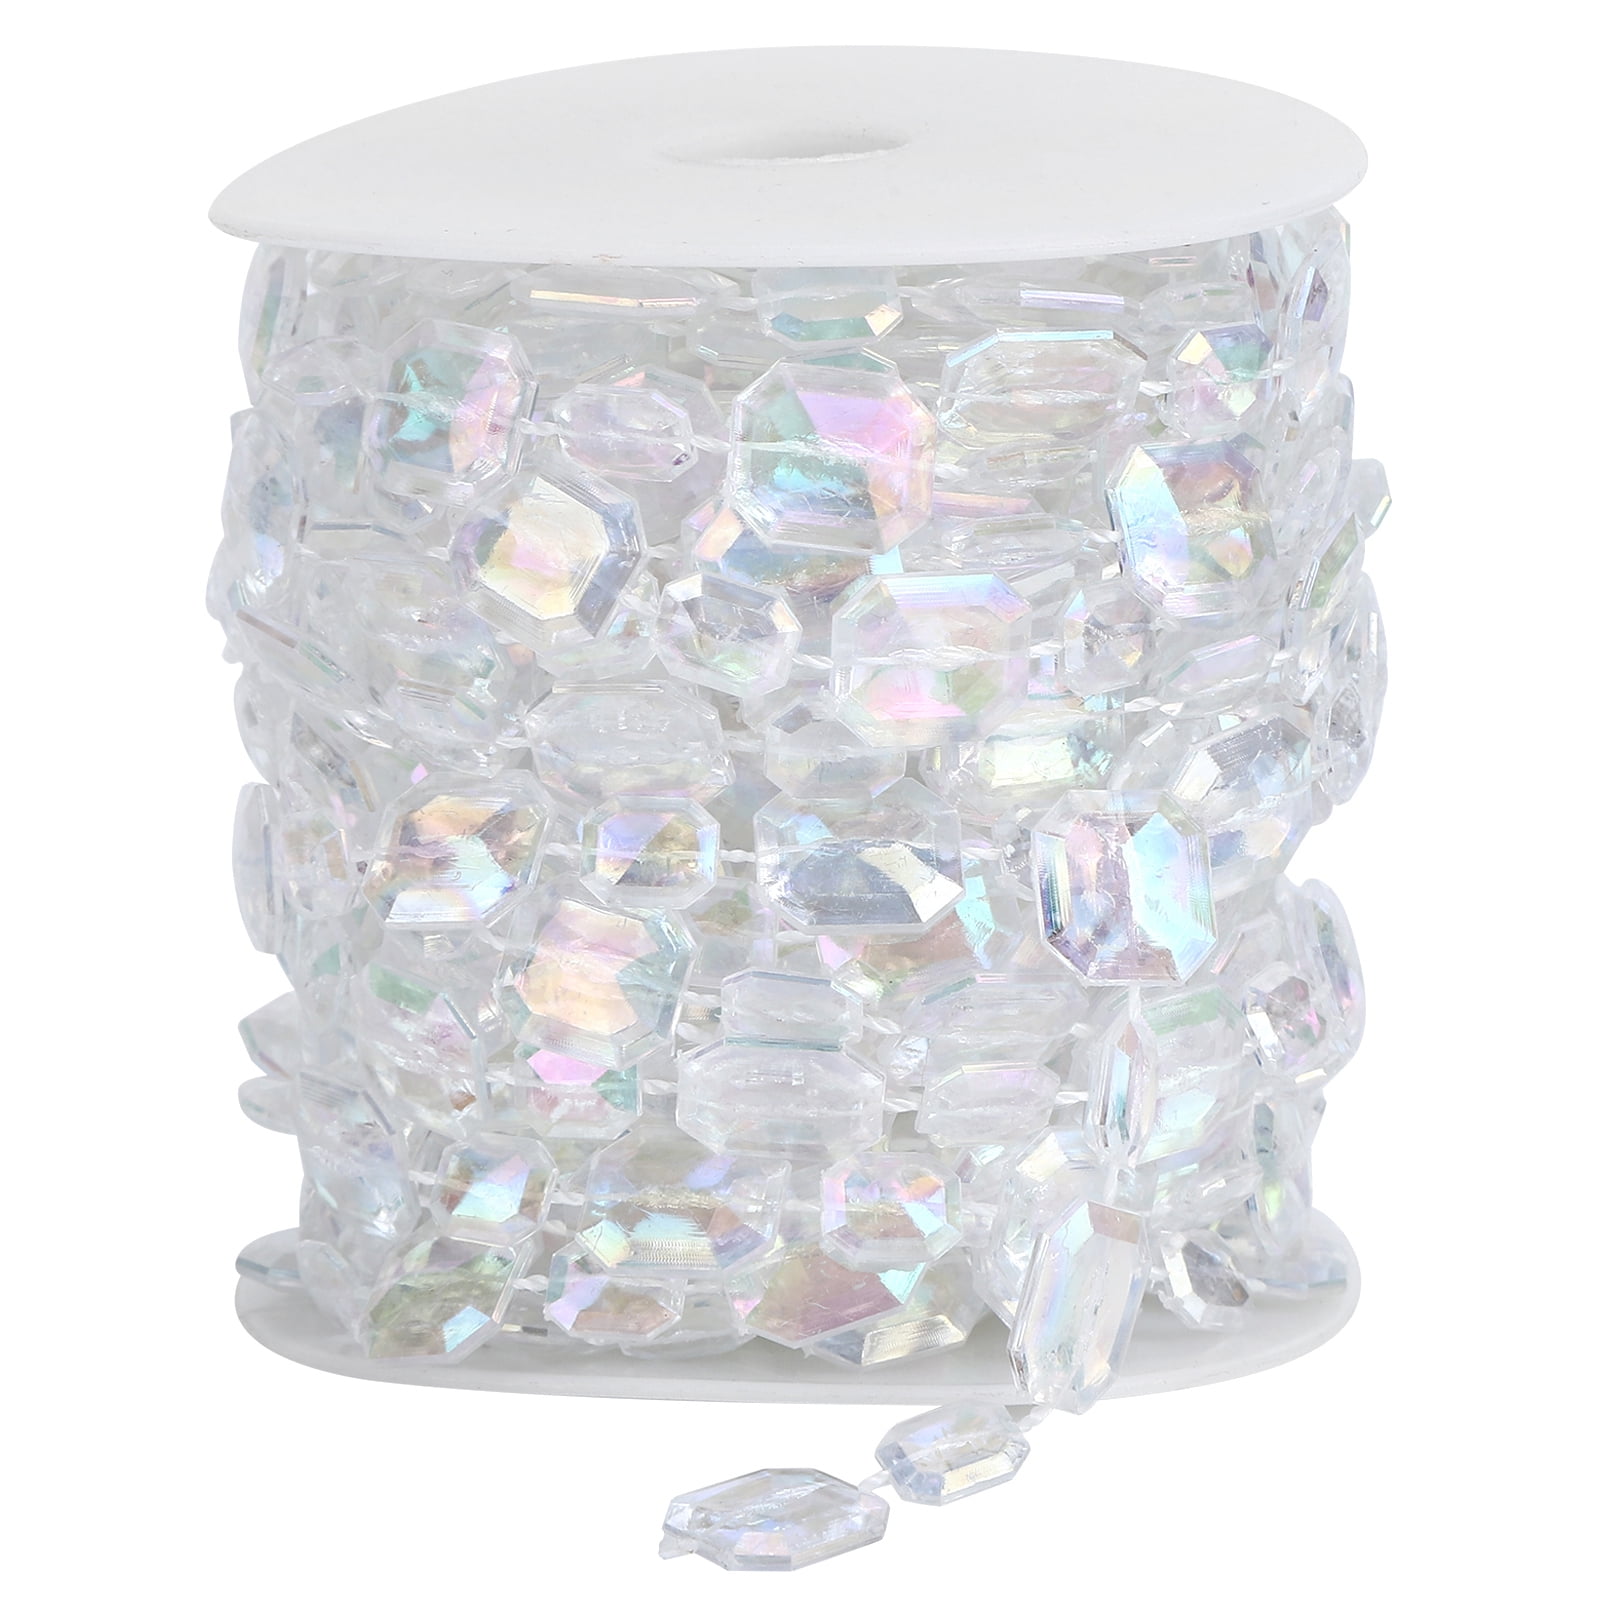 Crystal Bead Iridescent Octagonal Acrylic Beads Strand Chain Garland 32.8ft  Cuttable For Christmas, Valentine, Exhibition, Wedding, Clothing, Costume,  DIY Decoration 